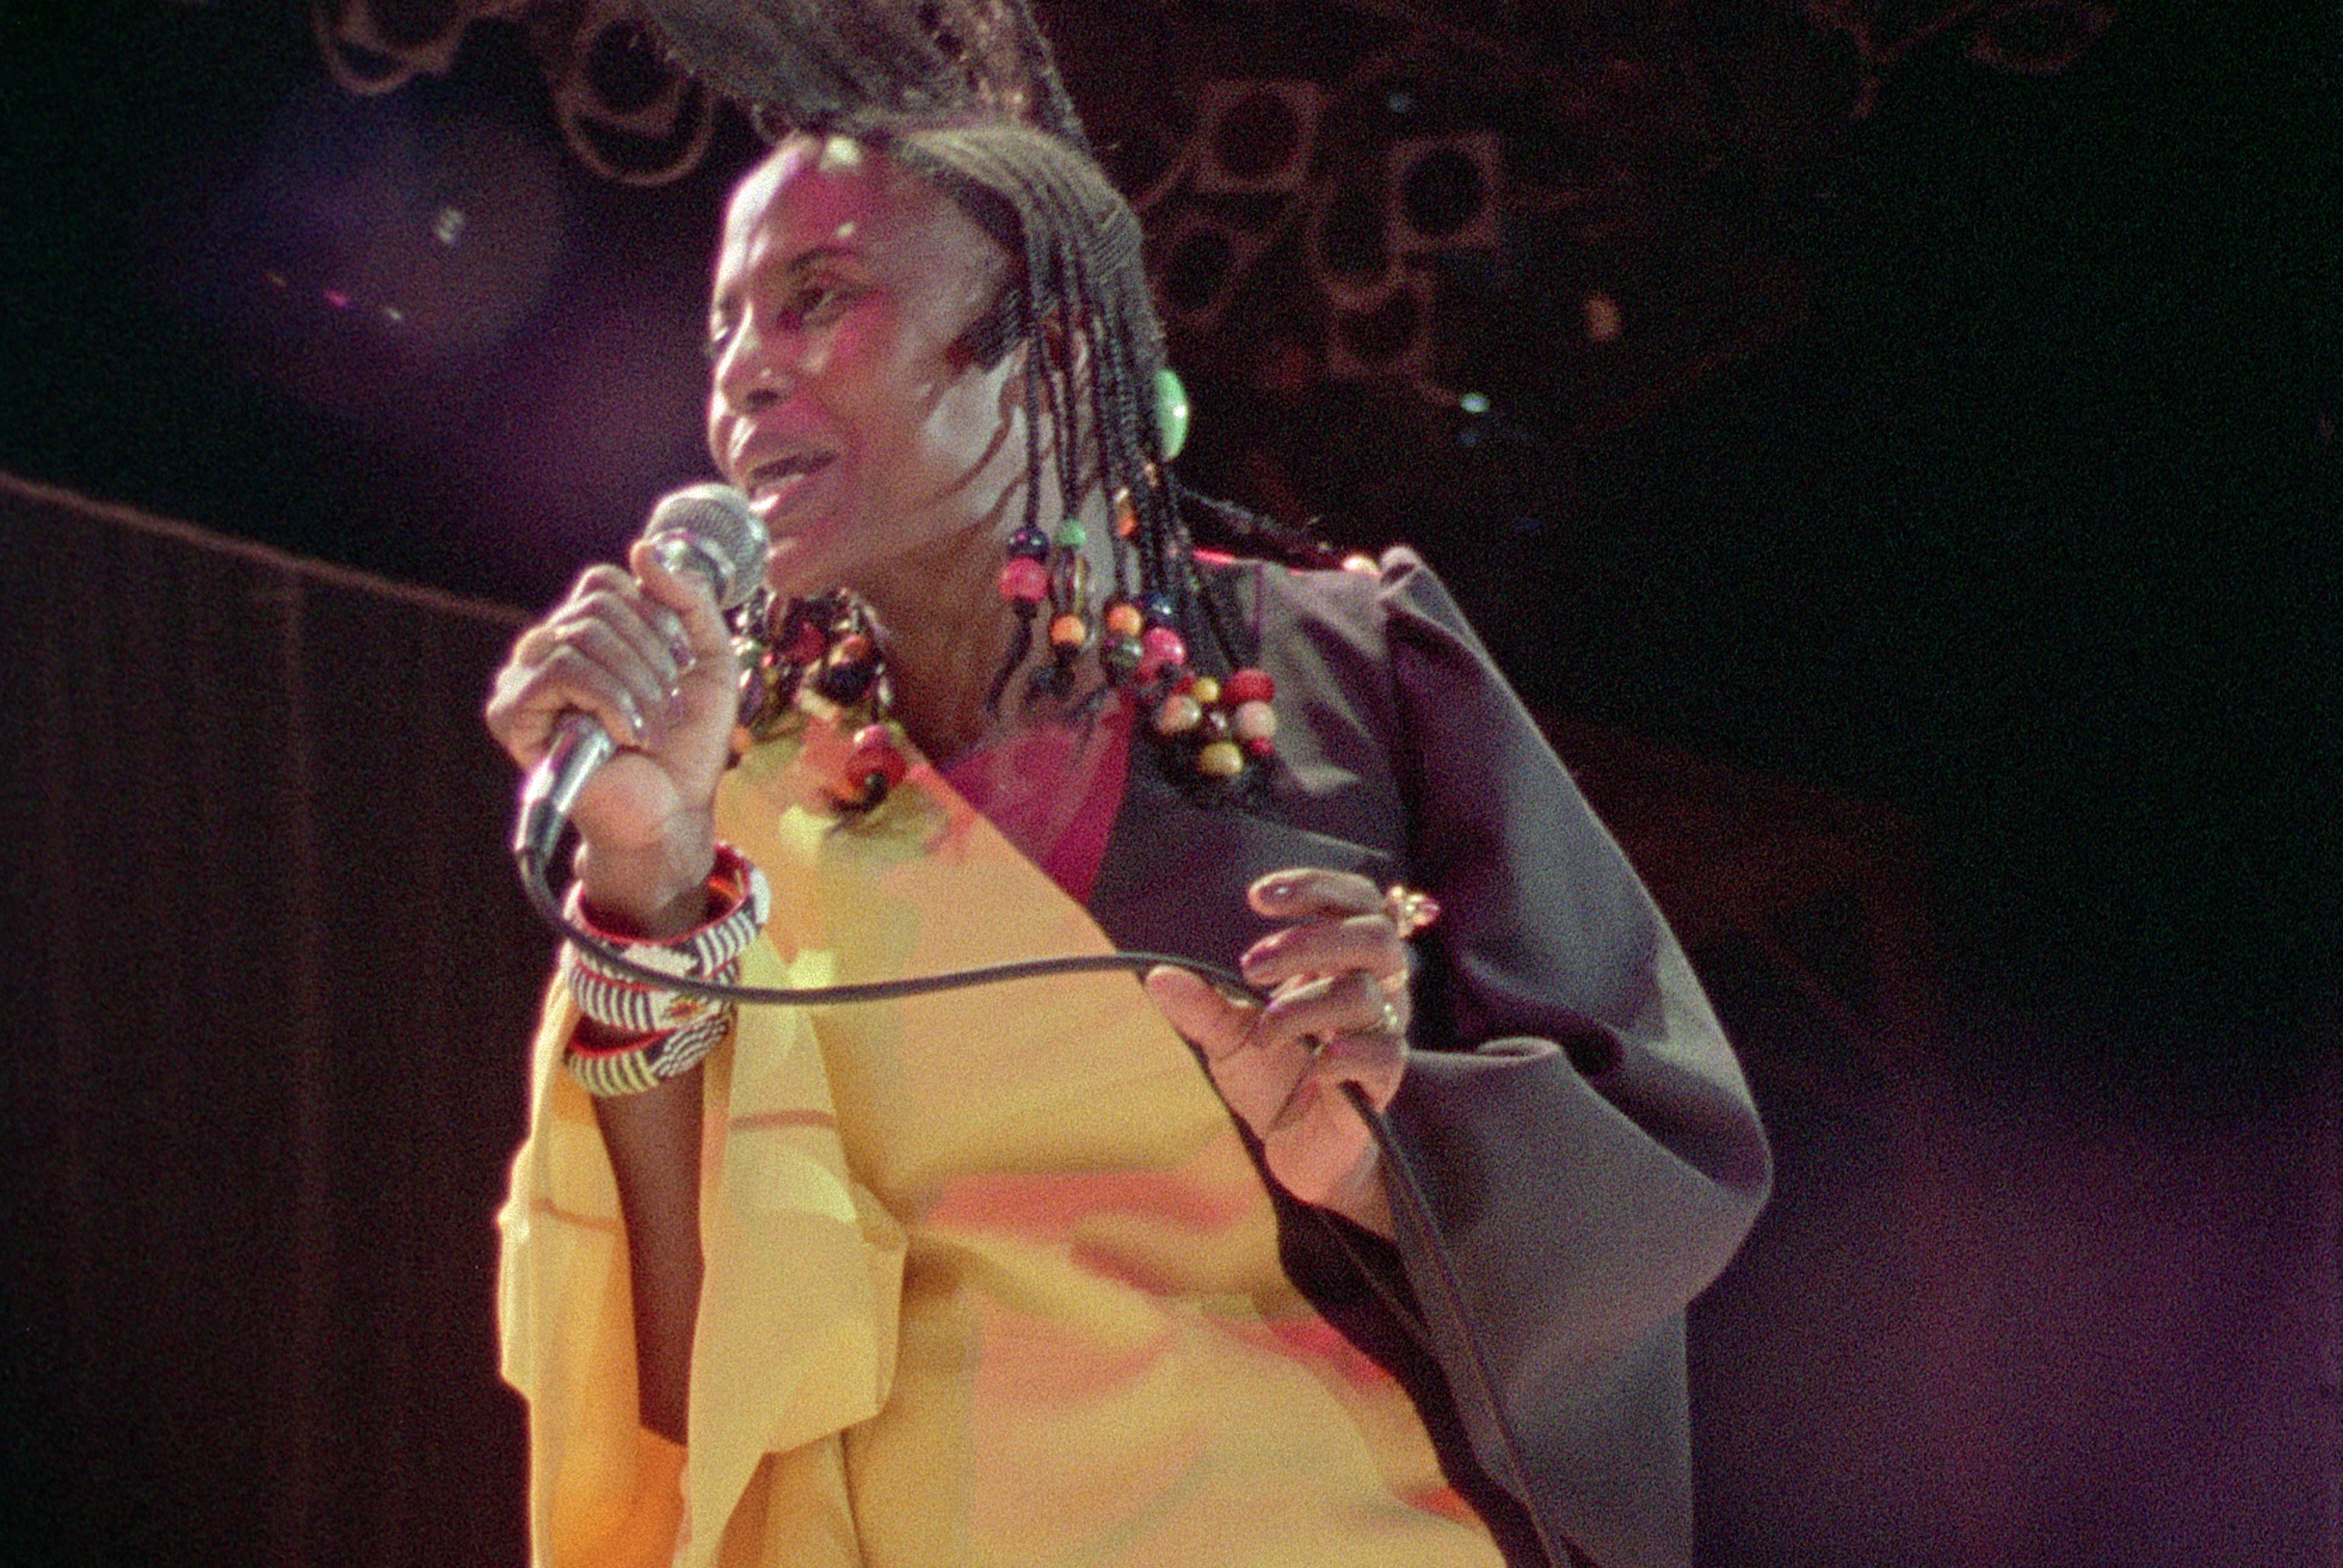 miriam-makeba-photos-courtesy-of-antidote-films-c2a9-property-of-sony-pictures-classics-all-rights-reserved